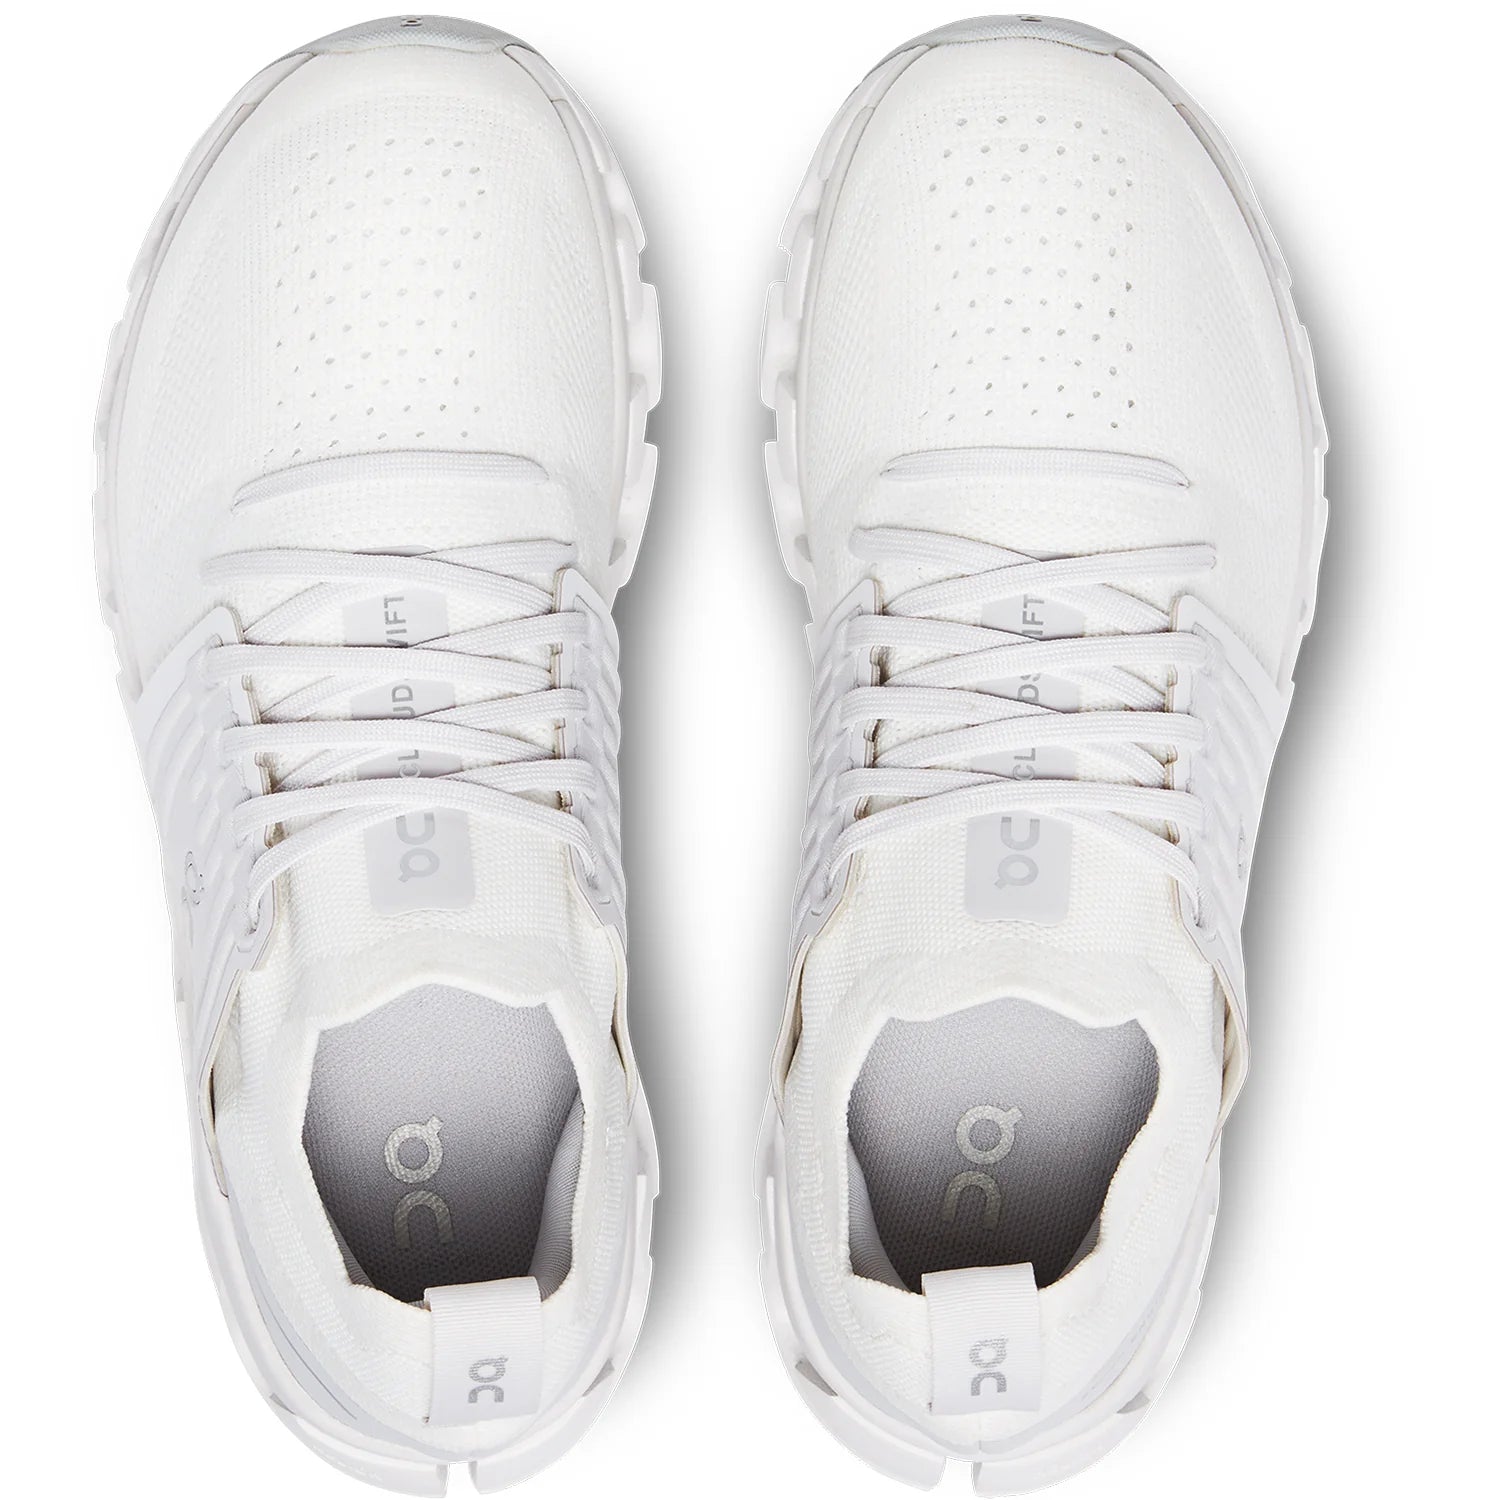 Top view of the Women's Cloudswift 3 by ON in all white